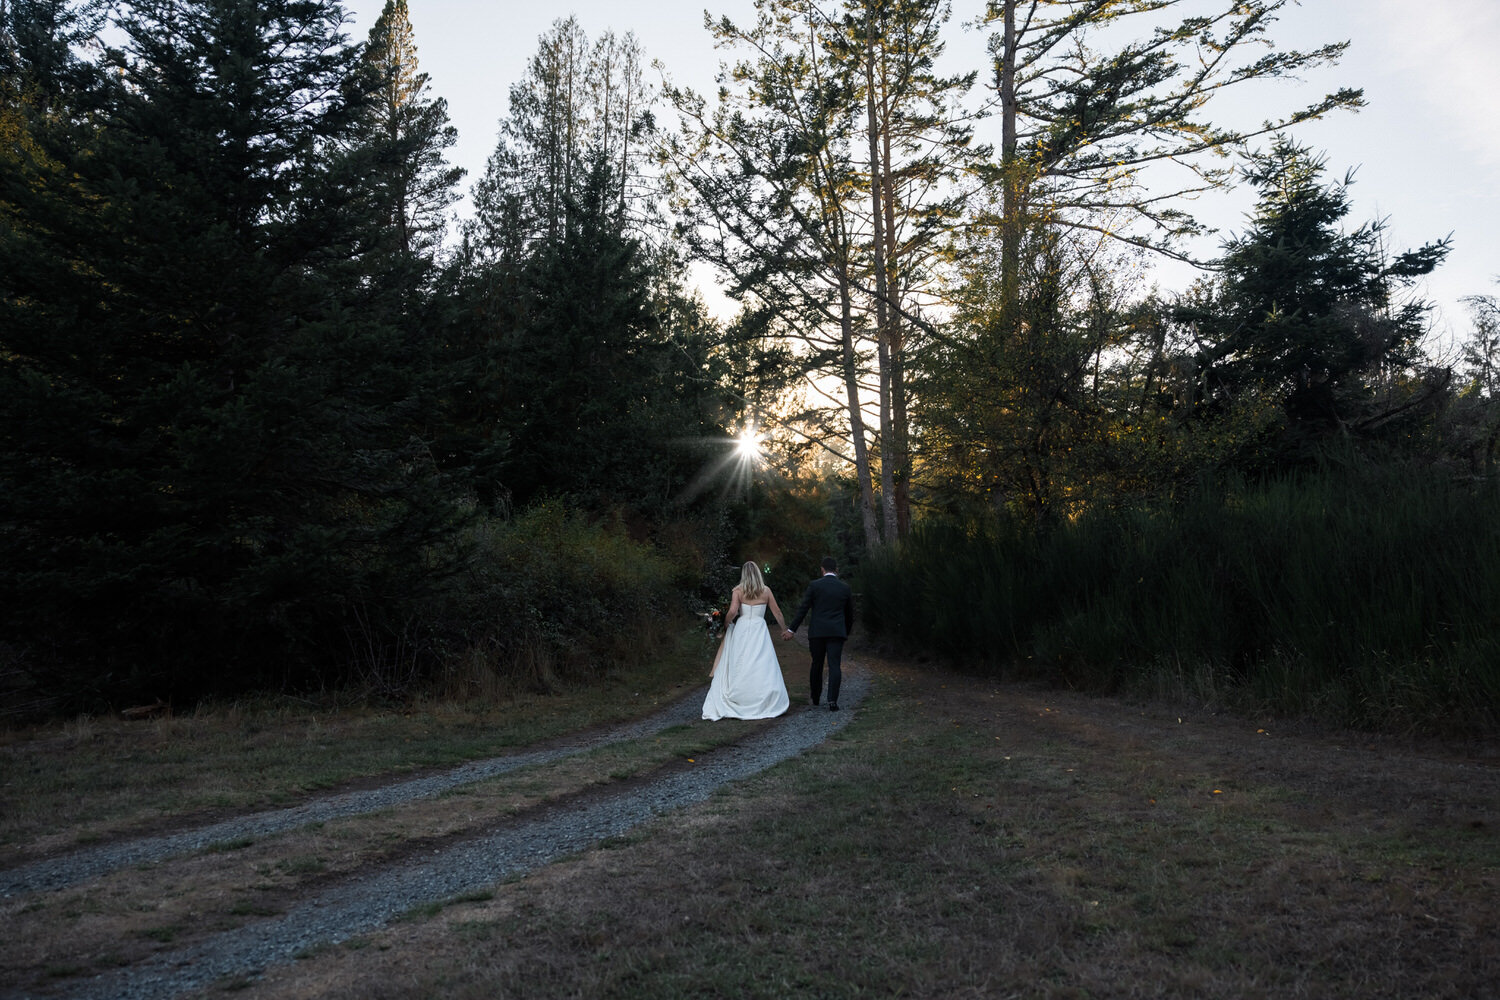 Vancouver Island Adventure Elopement and Small Wedding Photographer - Allie Knull's Photography-81.jpg